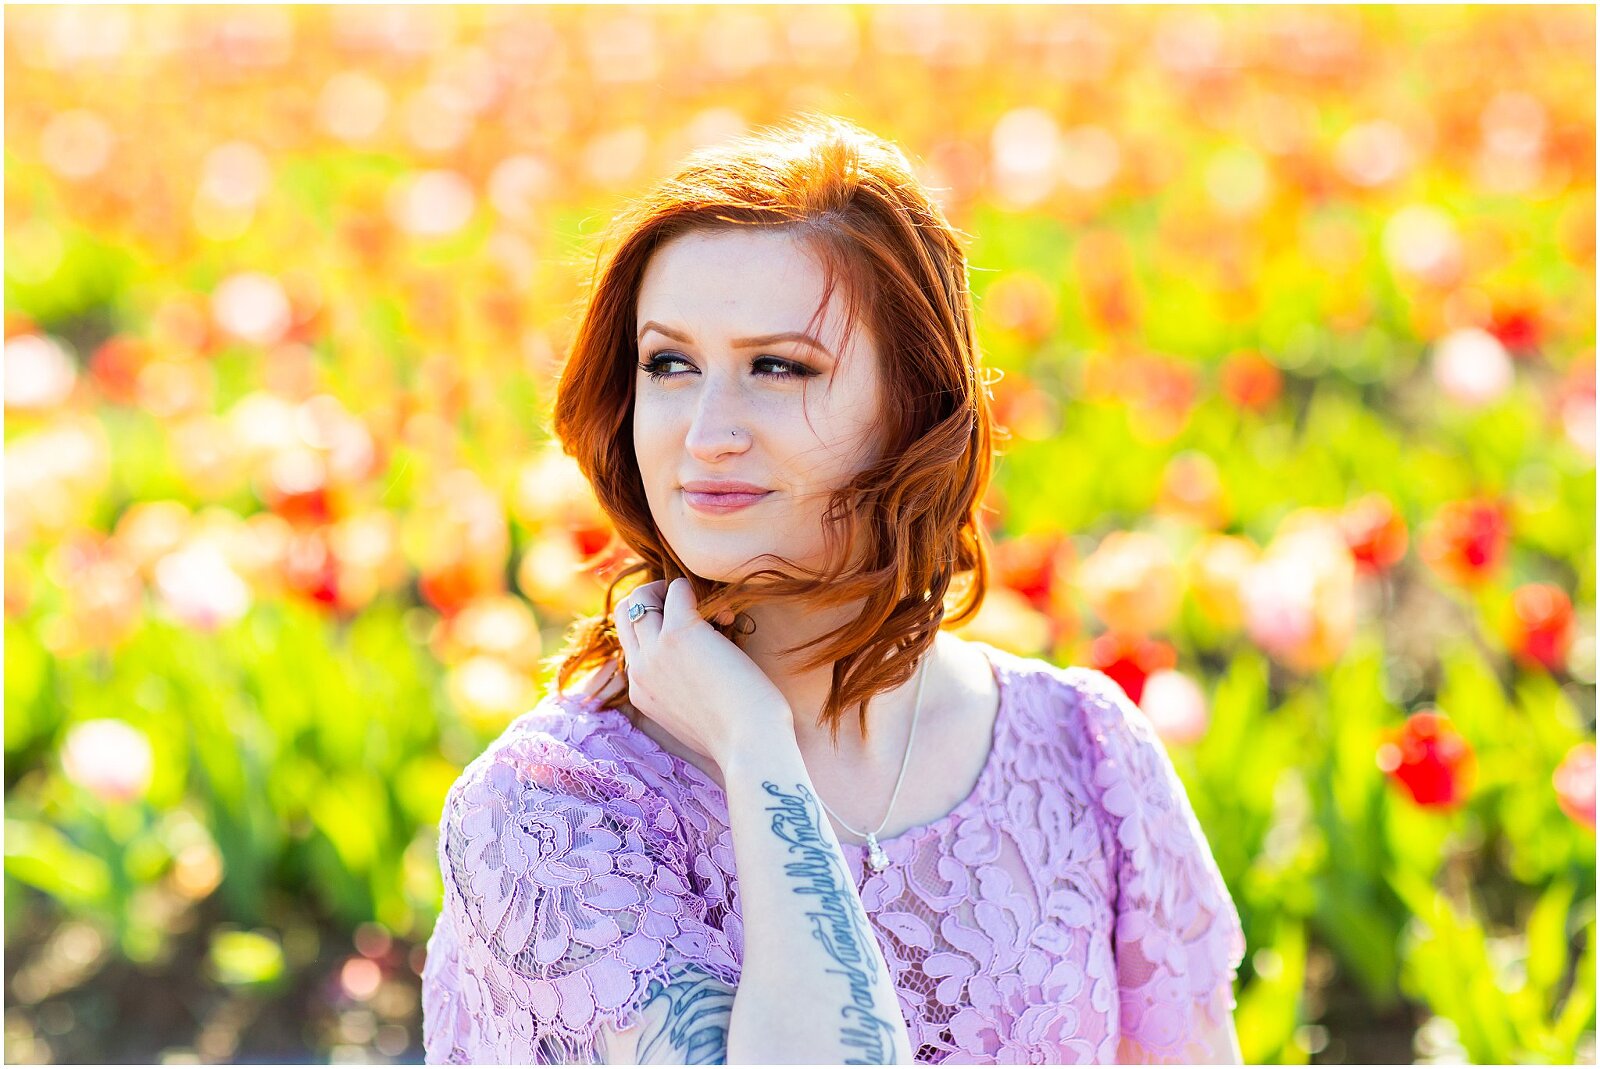 Heather’s BEAUTIFUL college grad photos took place in the Tulip Field at Burnside Farms in Nokesville, Virginia. With her beautiful red hair and lilac dress, this TULIP SENIOR SESSION blew me away!! It was a perfect spring day in April, and we had the field almost to ourselves. Click the link to see her FULL TULIP SENIOR SESSIONS! Photo by Bethanie Vetter Photography LLC. Website: bethanievetter.com #tulipseniorphotos #seniorphotos #virginiasenior #seniorportraits #springphotos #springflowers #springtulips #tulips #tuliplove #springseniorphotos #springsenior #floralsesssion #floralphotos #tuliphotos #bethanievetterportraits #bethanievetterphotography #lilacdress #purpledress #redhair #auburn